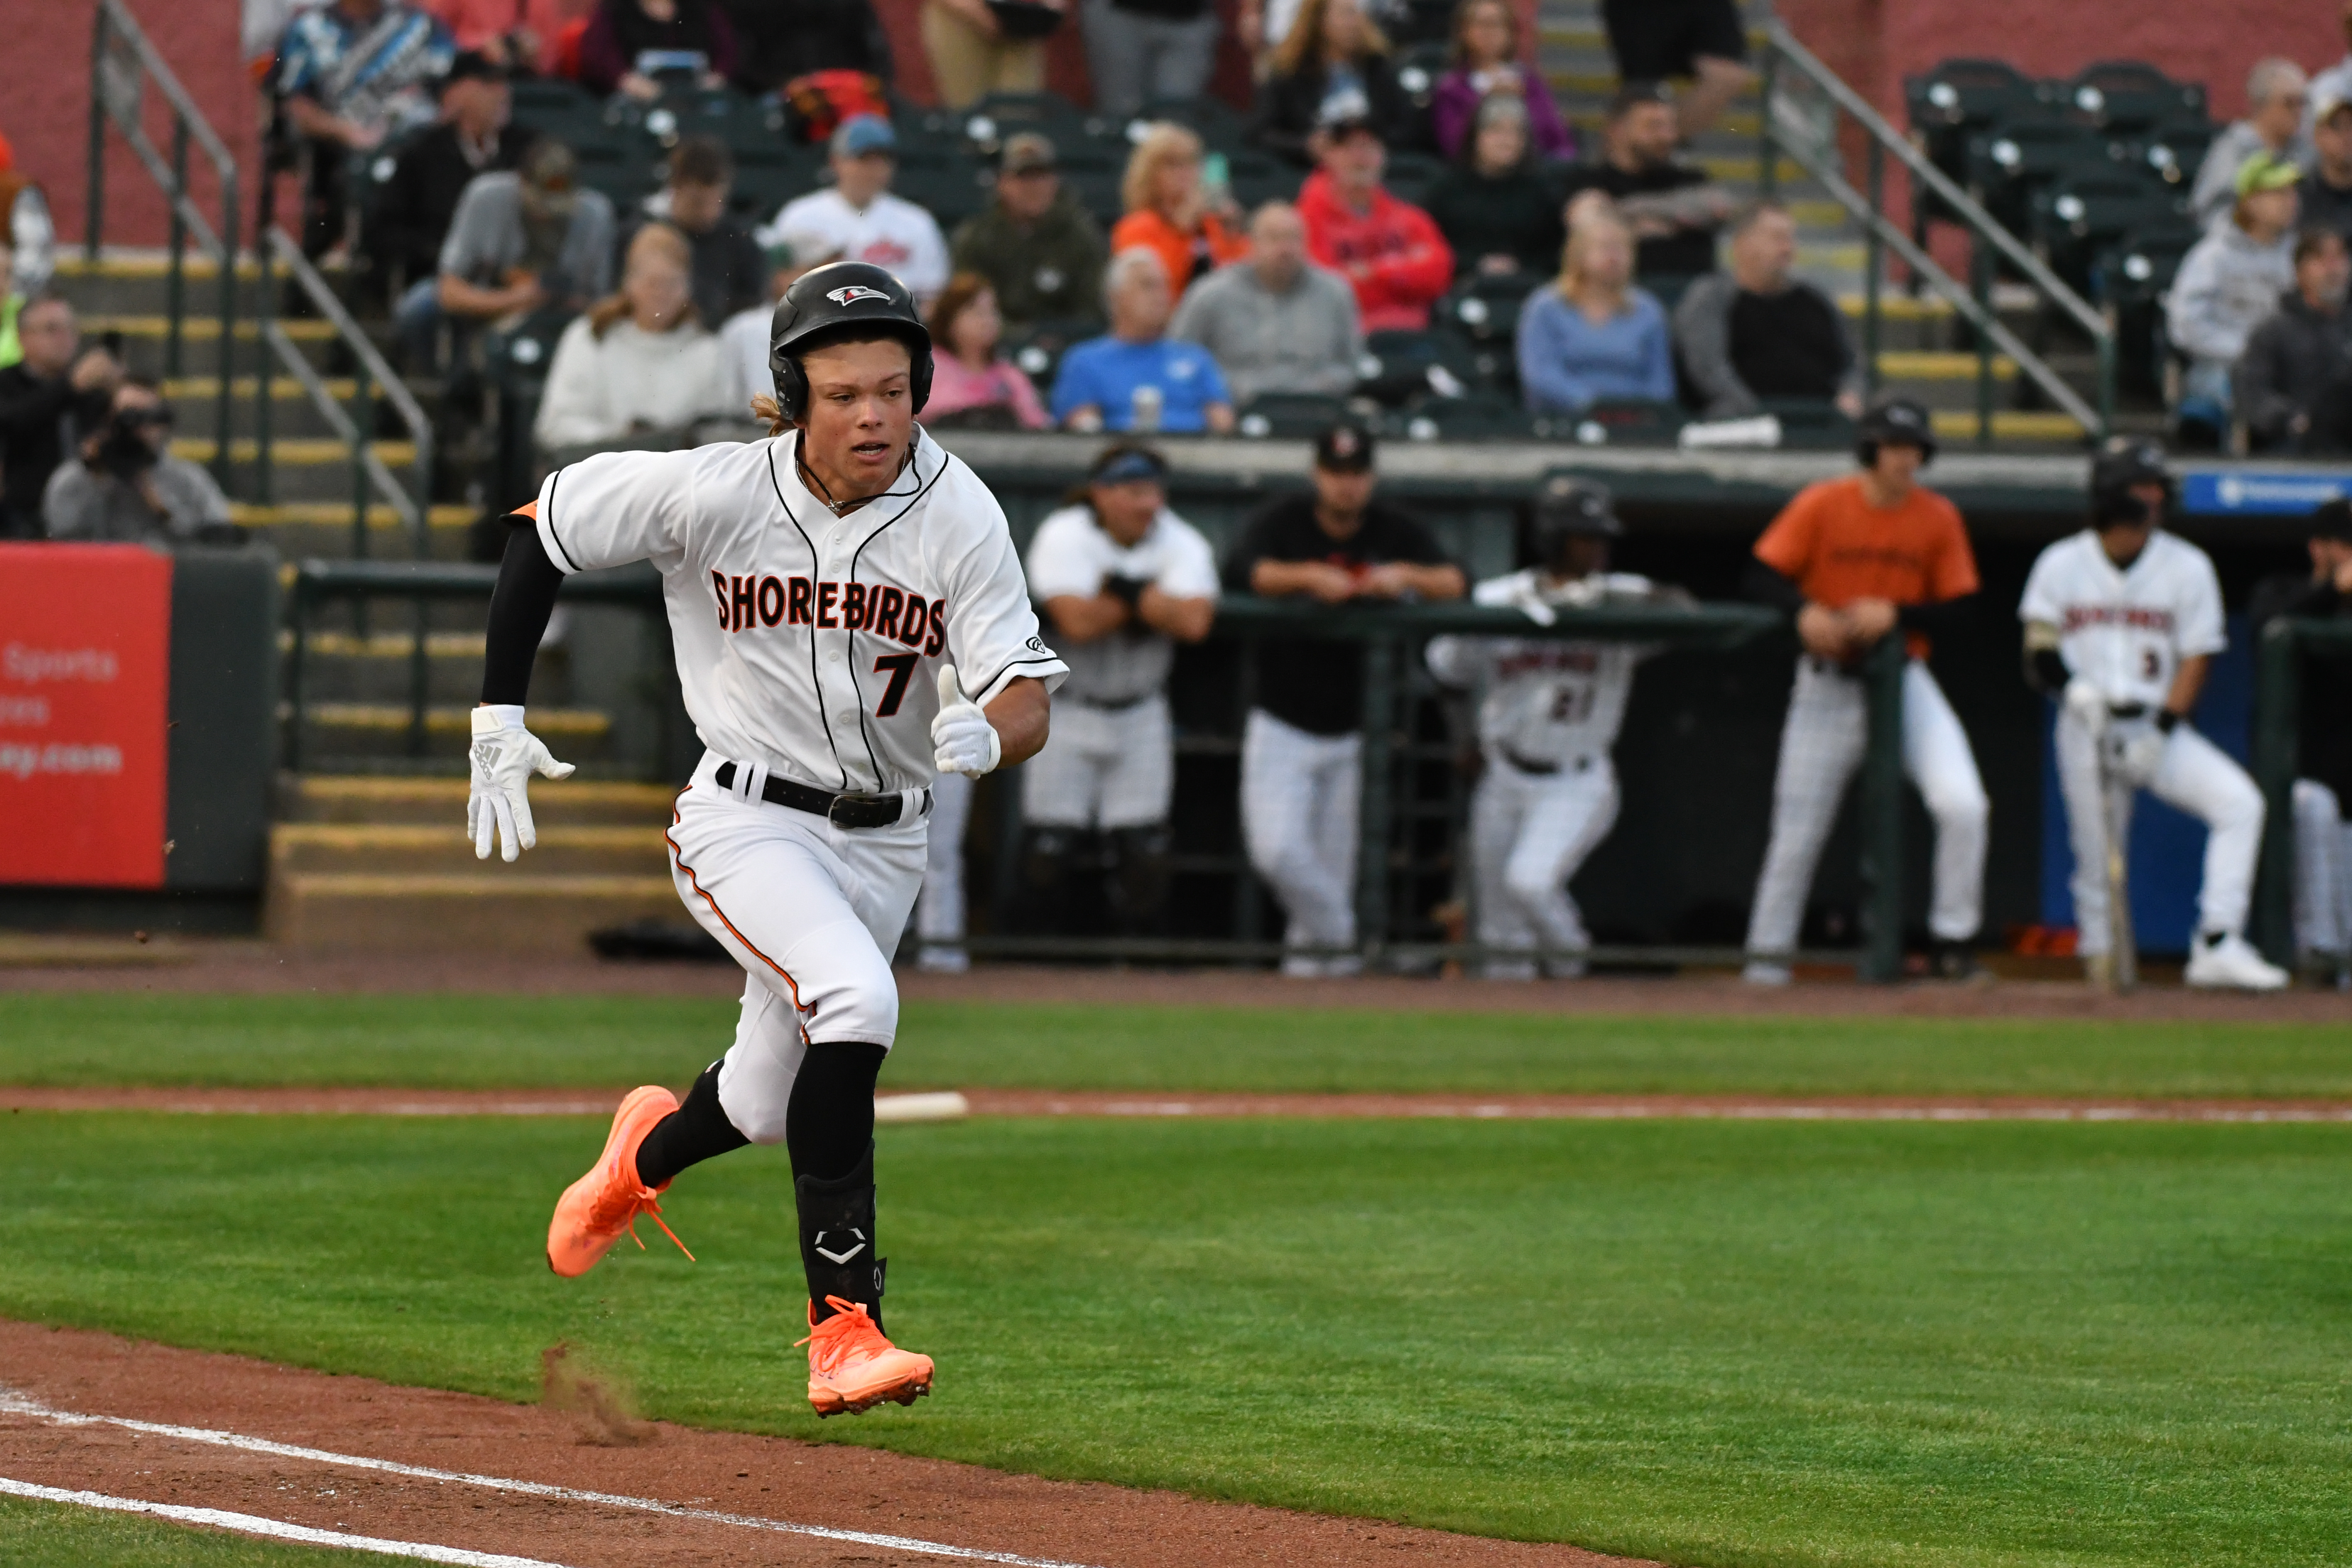 Jon Meoli: O's prospect Jackson Holliday off to hot start in first